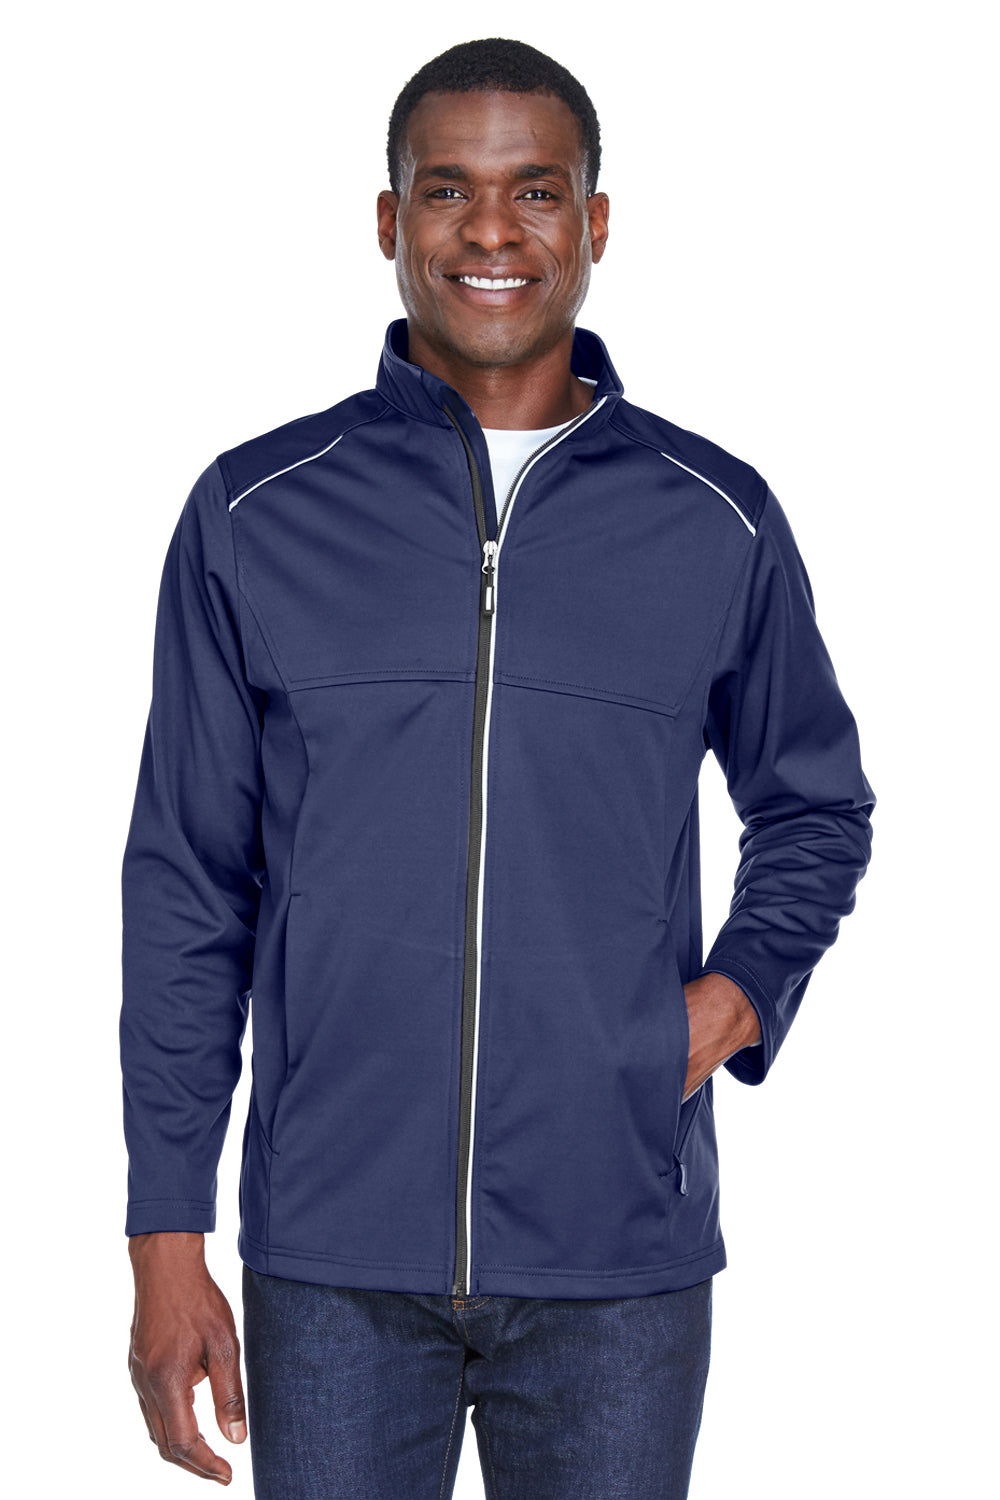 Core 365 CE708 Mens Techno Lite Water Resistant Full Zip Jacket Navy Blue Front